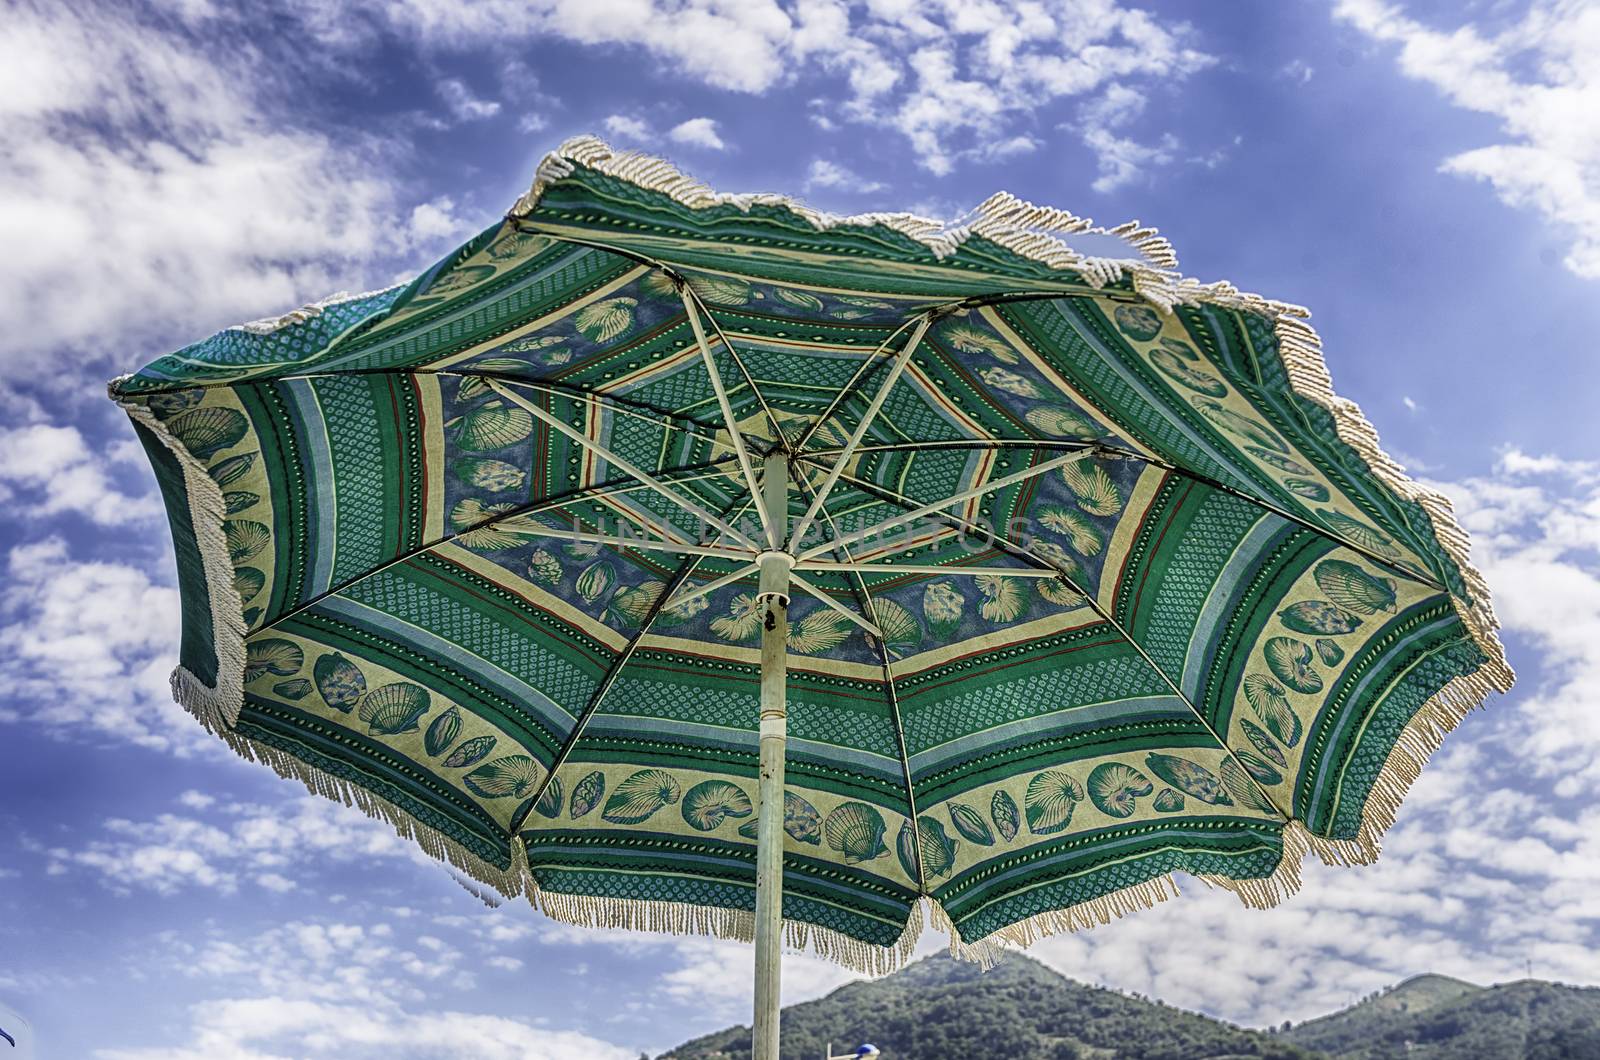 Decorated green beach umbrella as seen from the ground against the background of a light sky